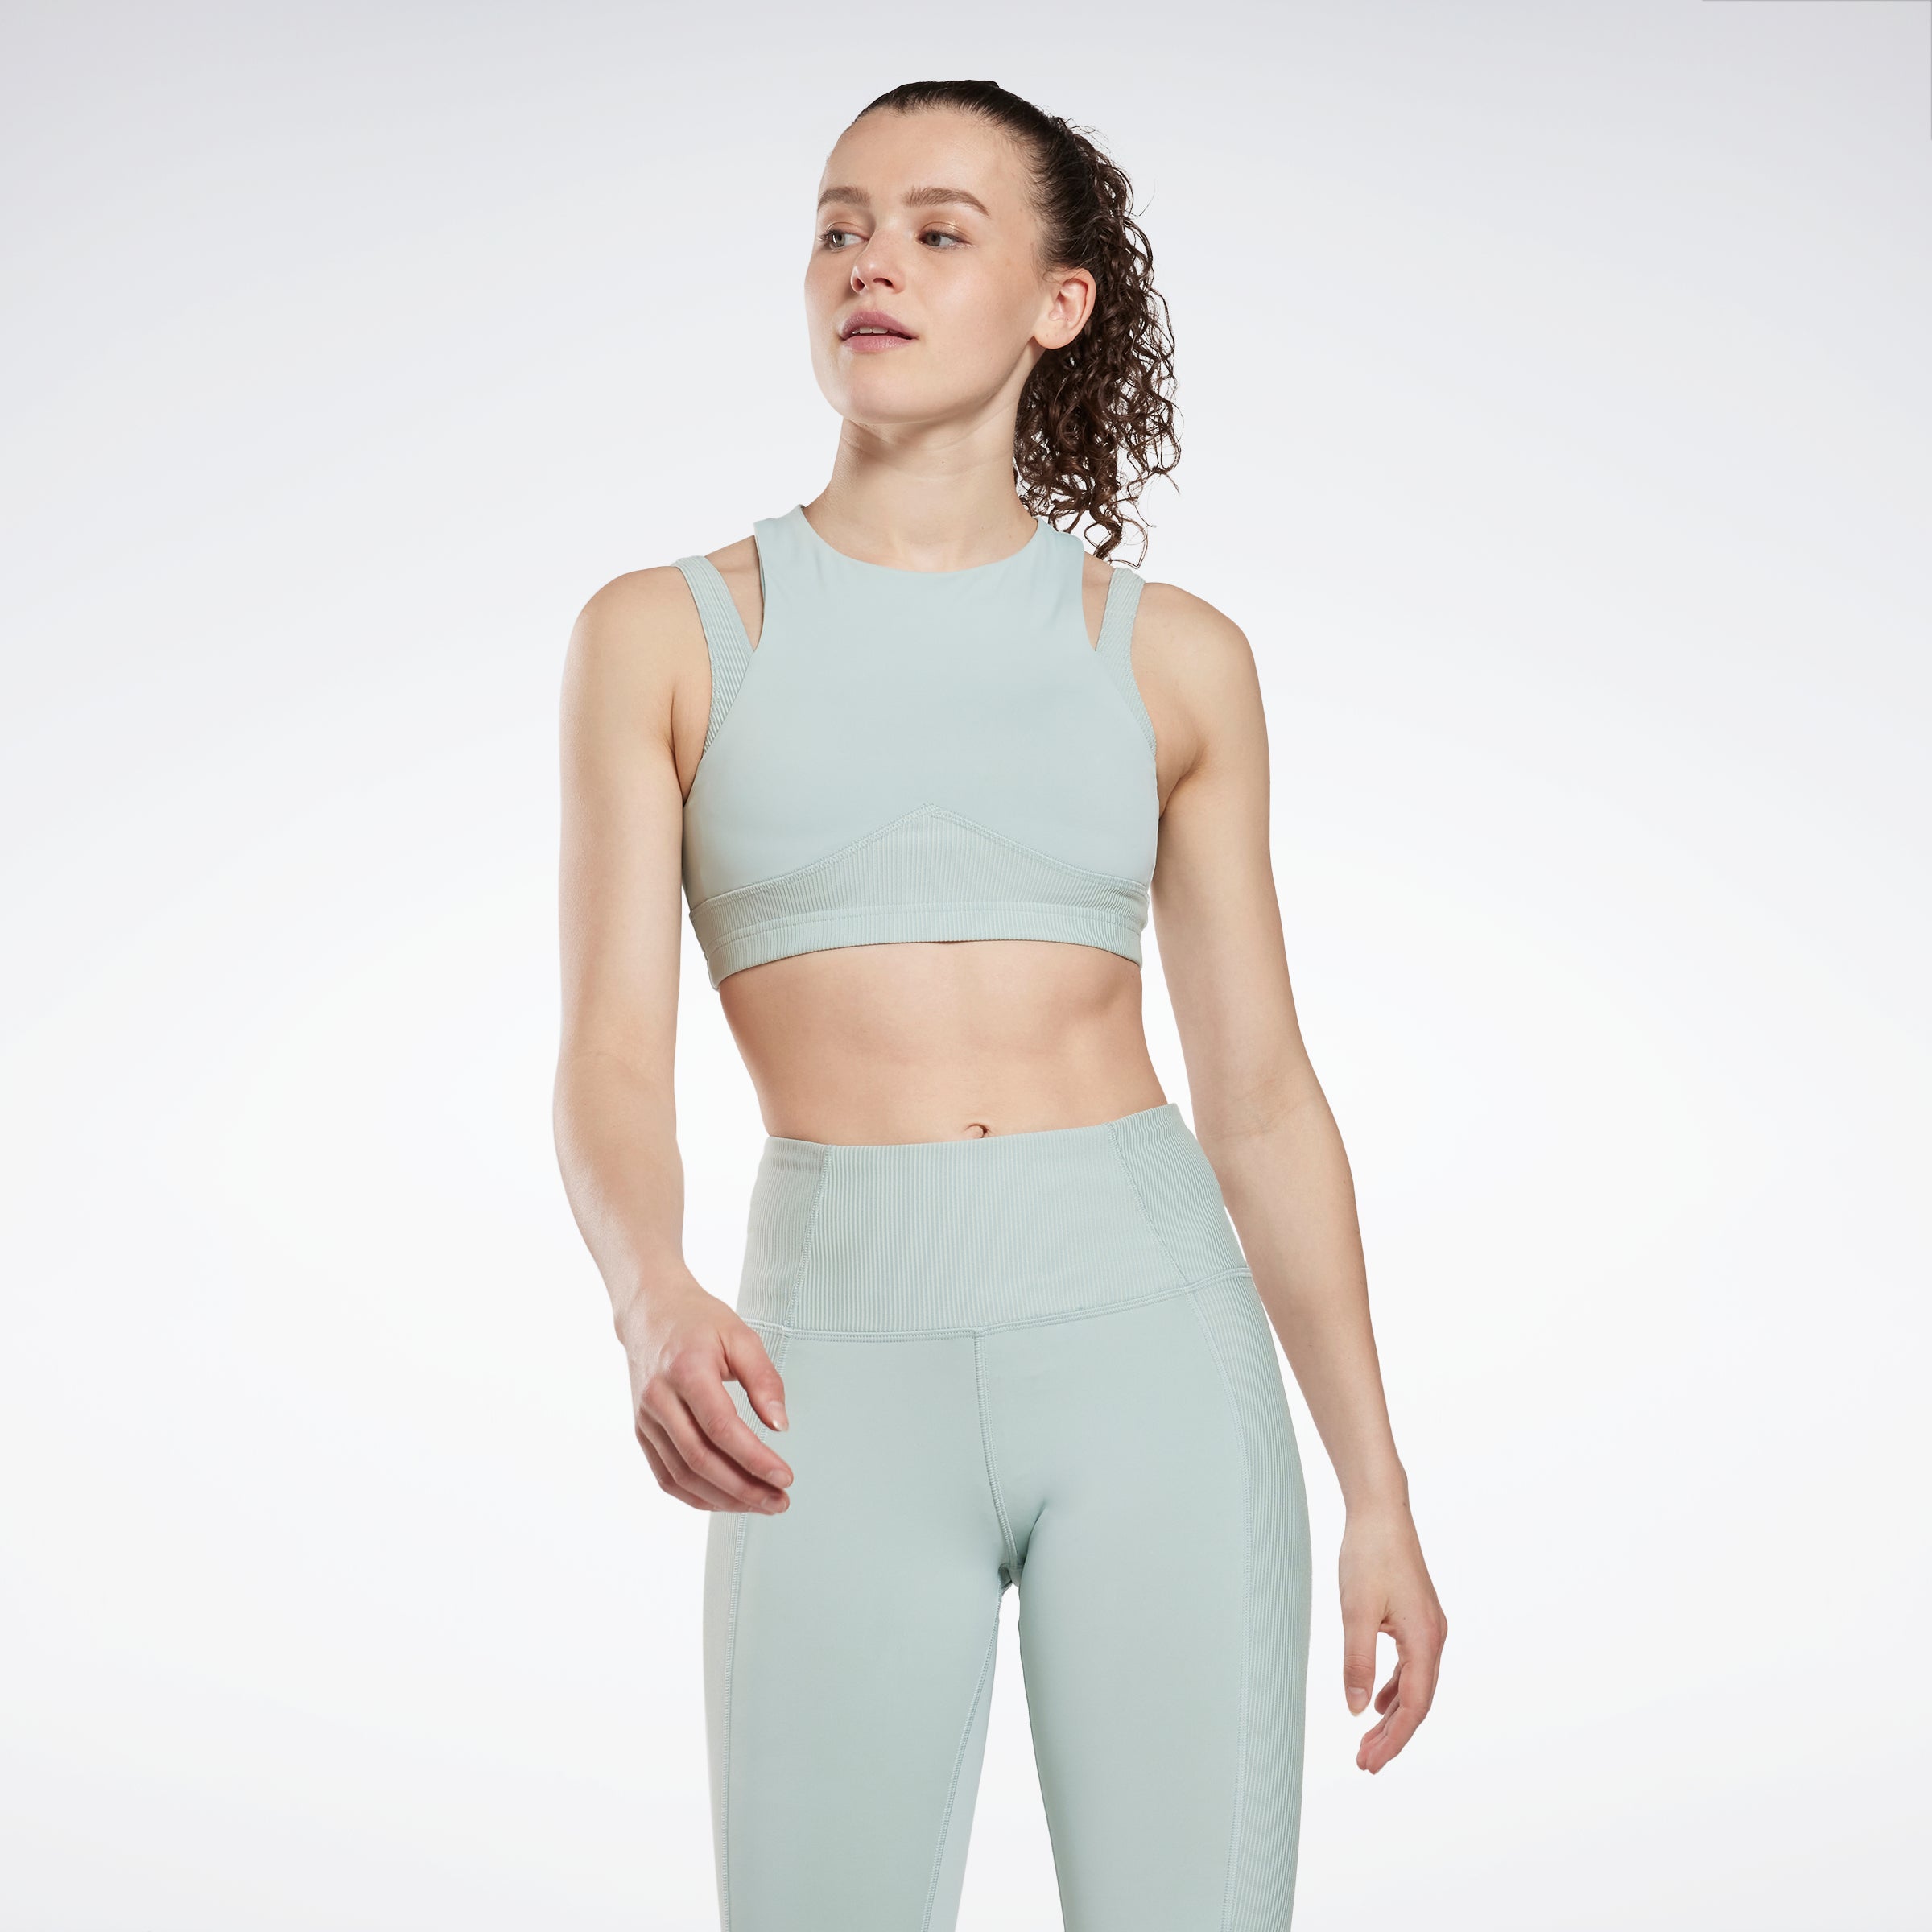 Palm Angels Store Toronto - Palm Angels Sports Bras Canada Sale